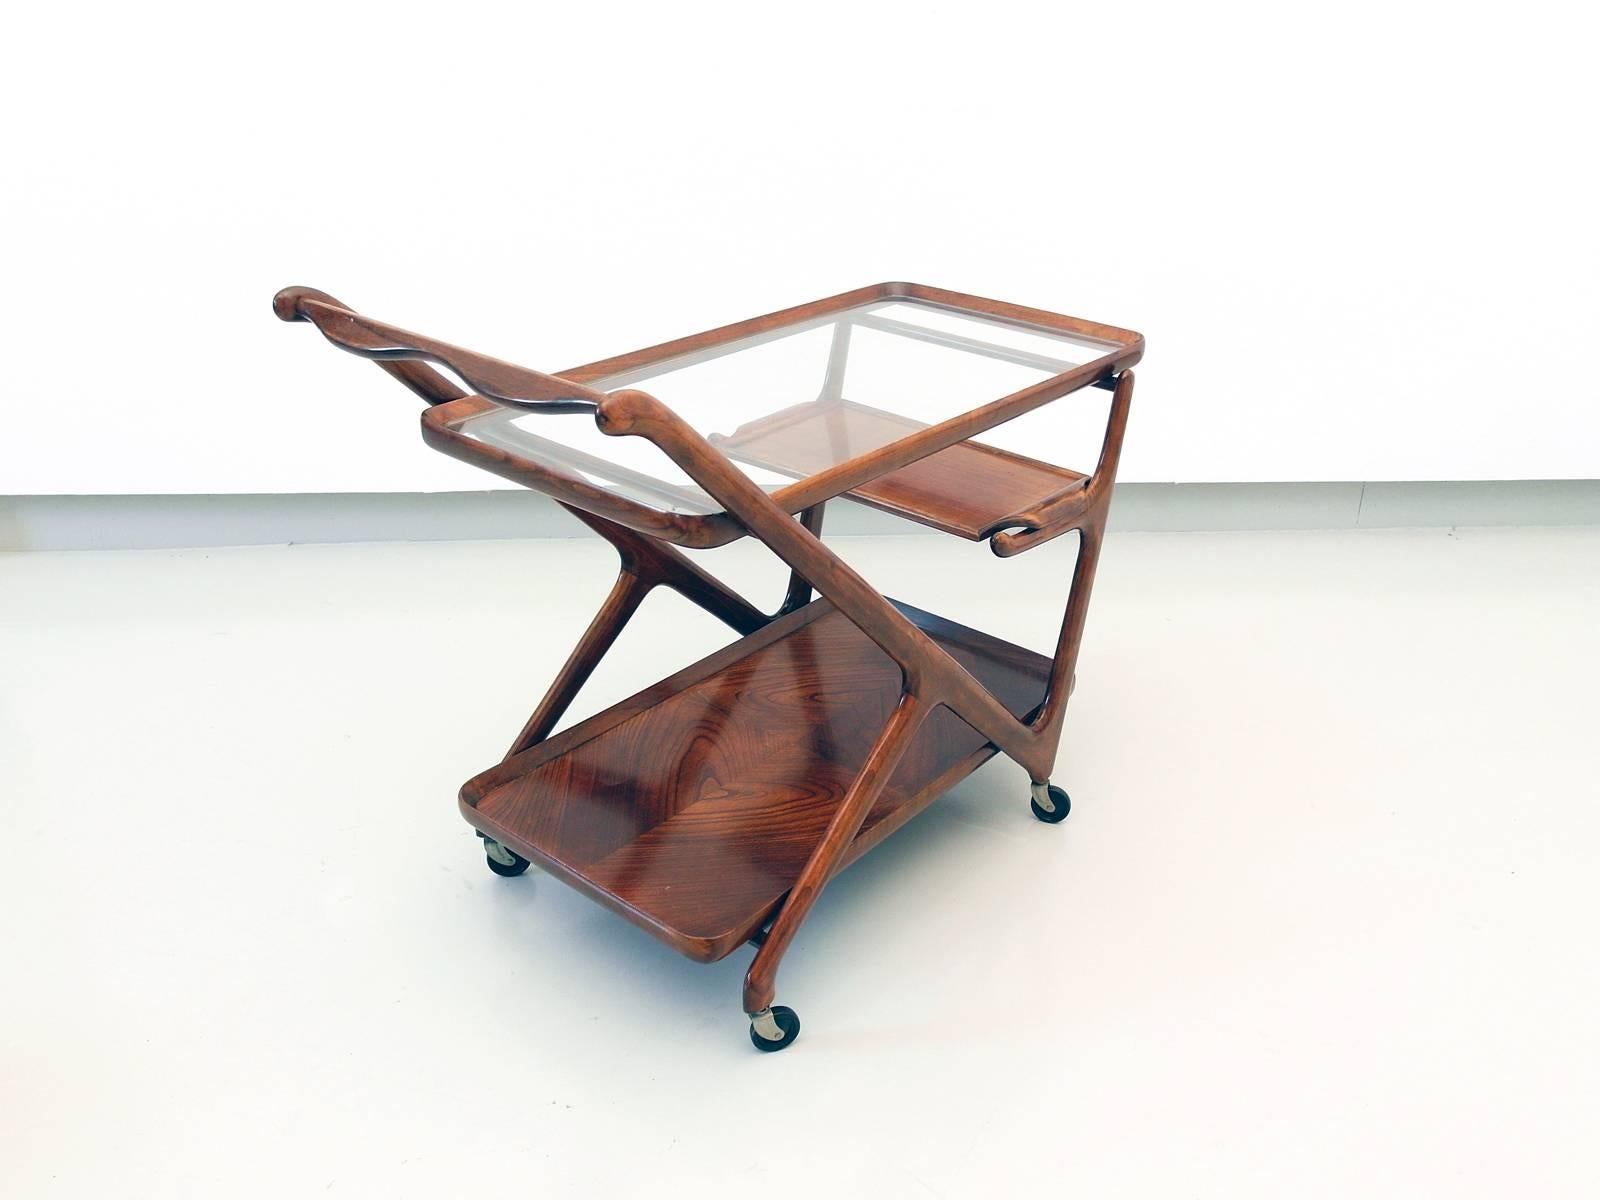 Glass Cesare Lacca Tea Trolley for Cassina, Italy, 1951